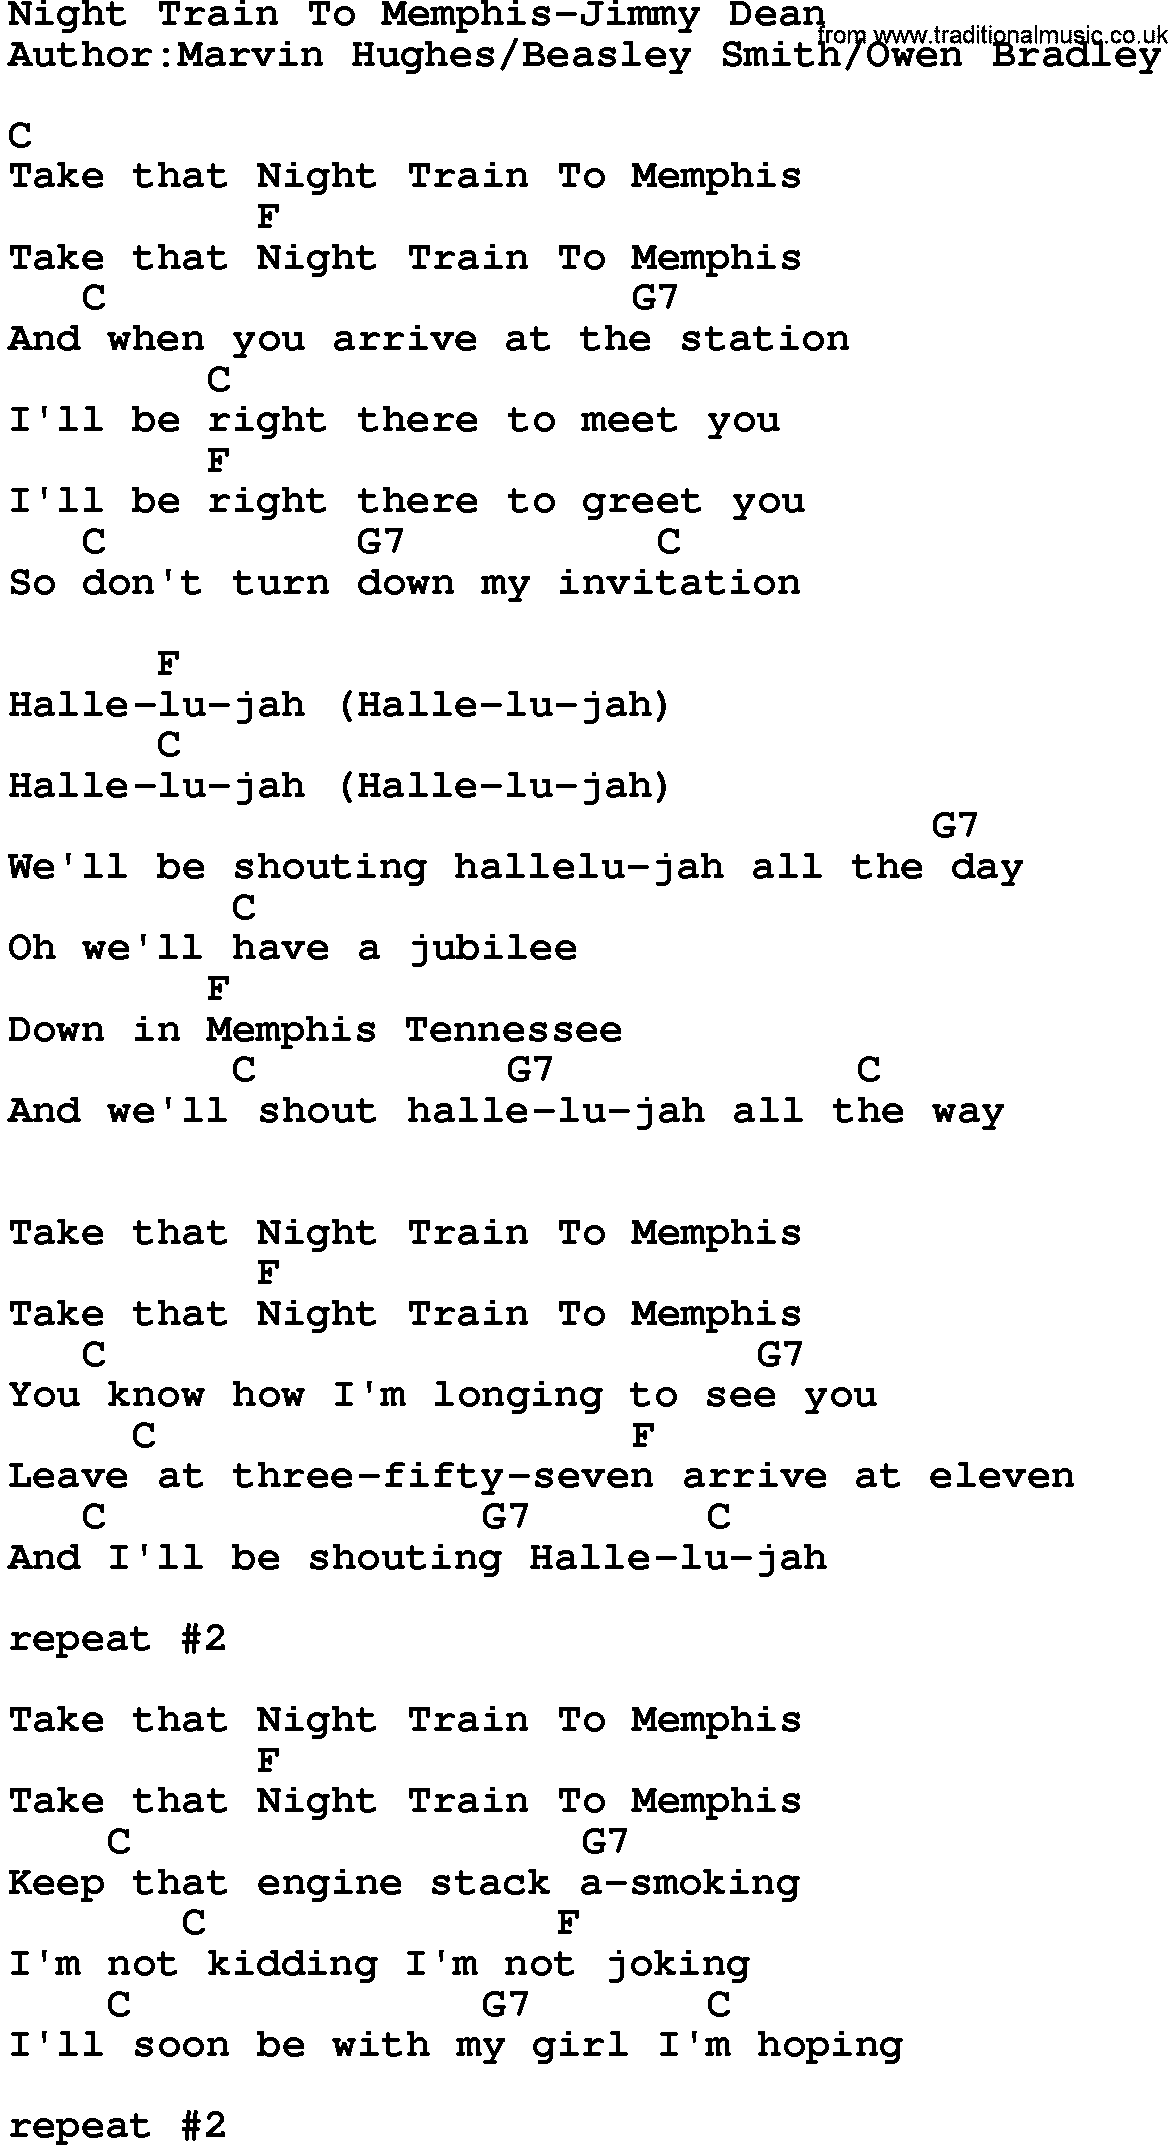 Country music song: Night Train To Memphis-Jimmy Dean lyrics and chords